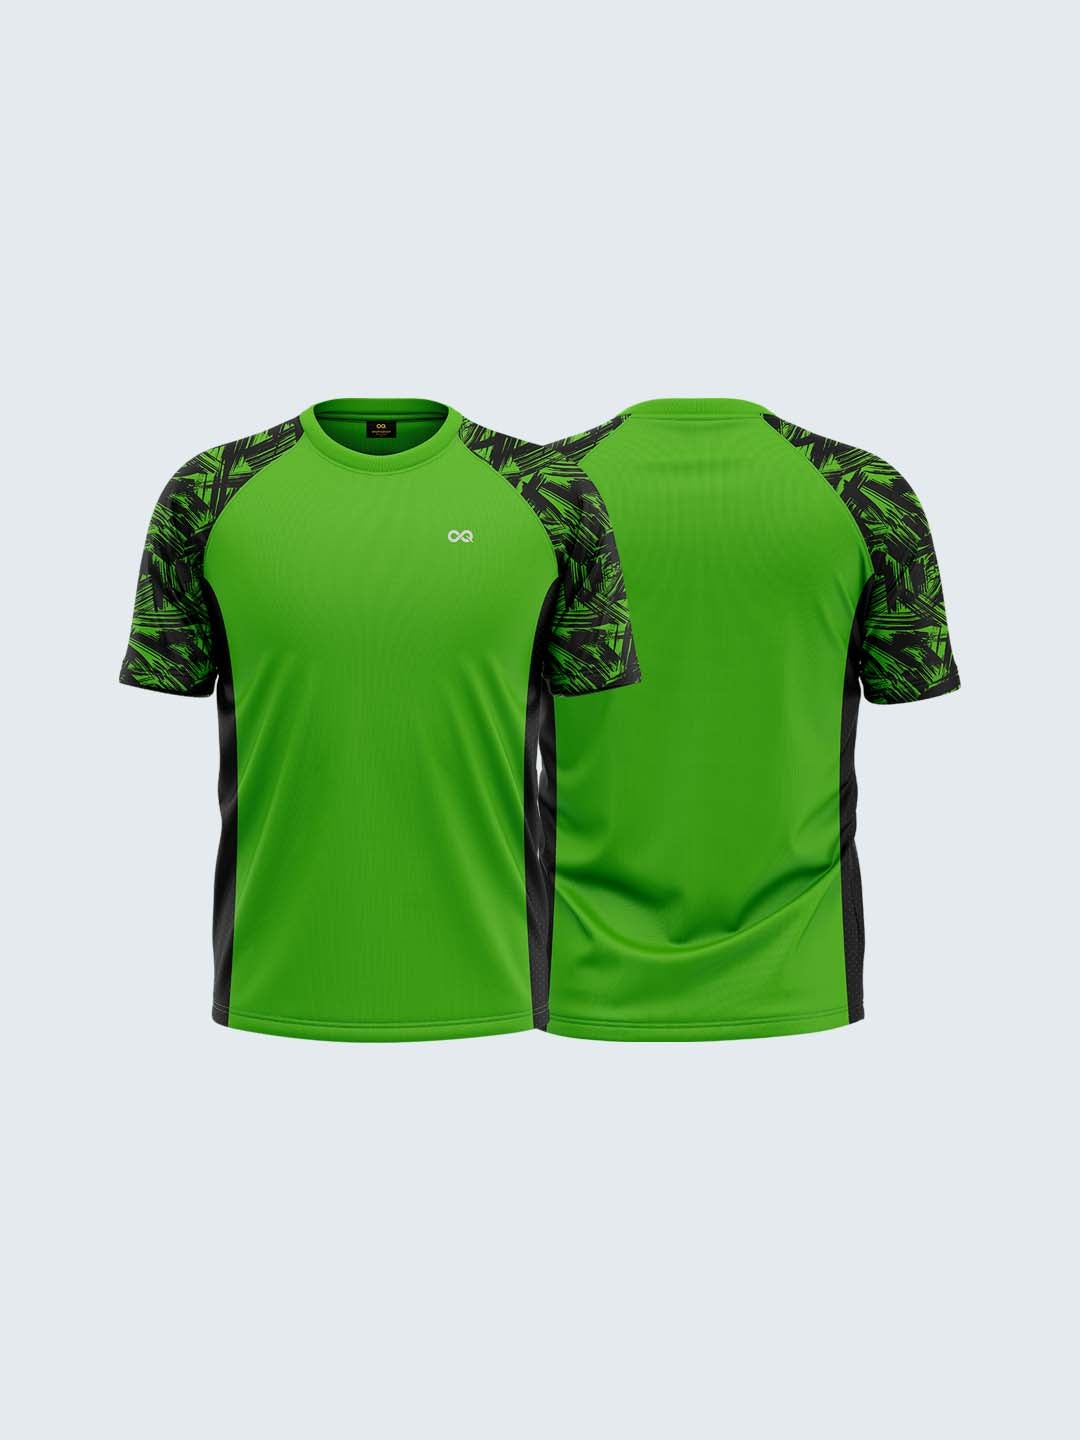 Sports Tshirts Colours - Sports Jersey Colours